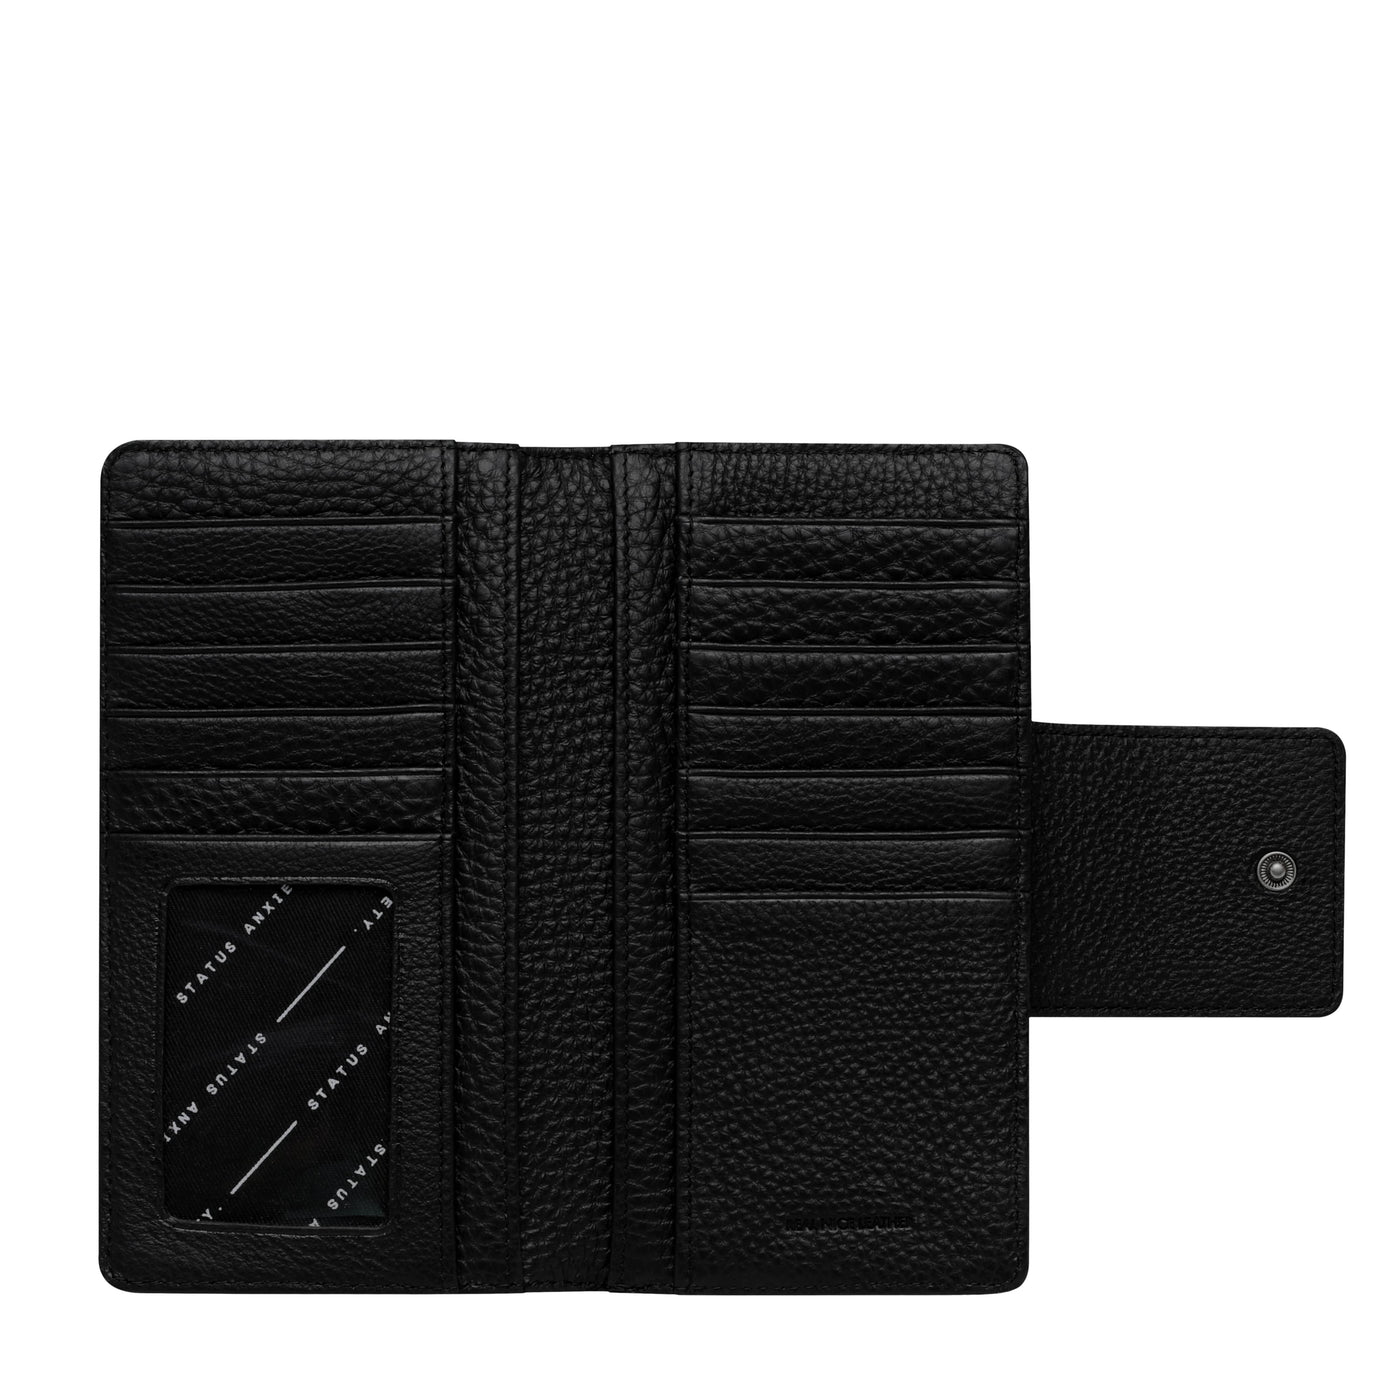 STATUS ANXIETY RUINS WALLET   The Status Anxiety Ruins Wallet is an easy-to-carry wallet, with a slim silhouette and profile, making it perfect for daily use and any outfit. The Ruins Wallet features a oversized clip clasp to close, with a large external coin pocket, and plenty of internal card slots, and individual bank note spaces. The outside zipper section makes for easy access to your cash without having to open the main section of the wallet.